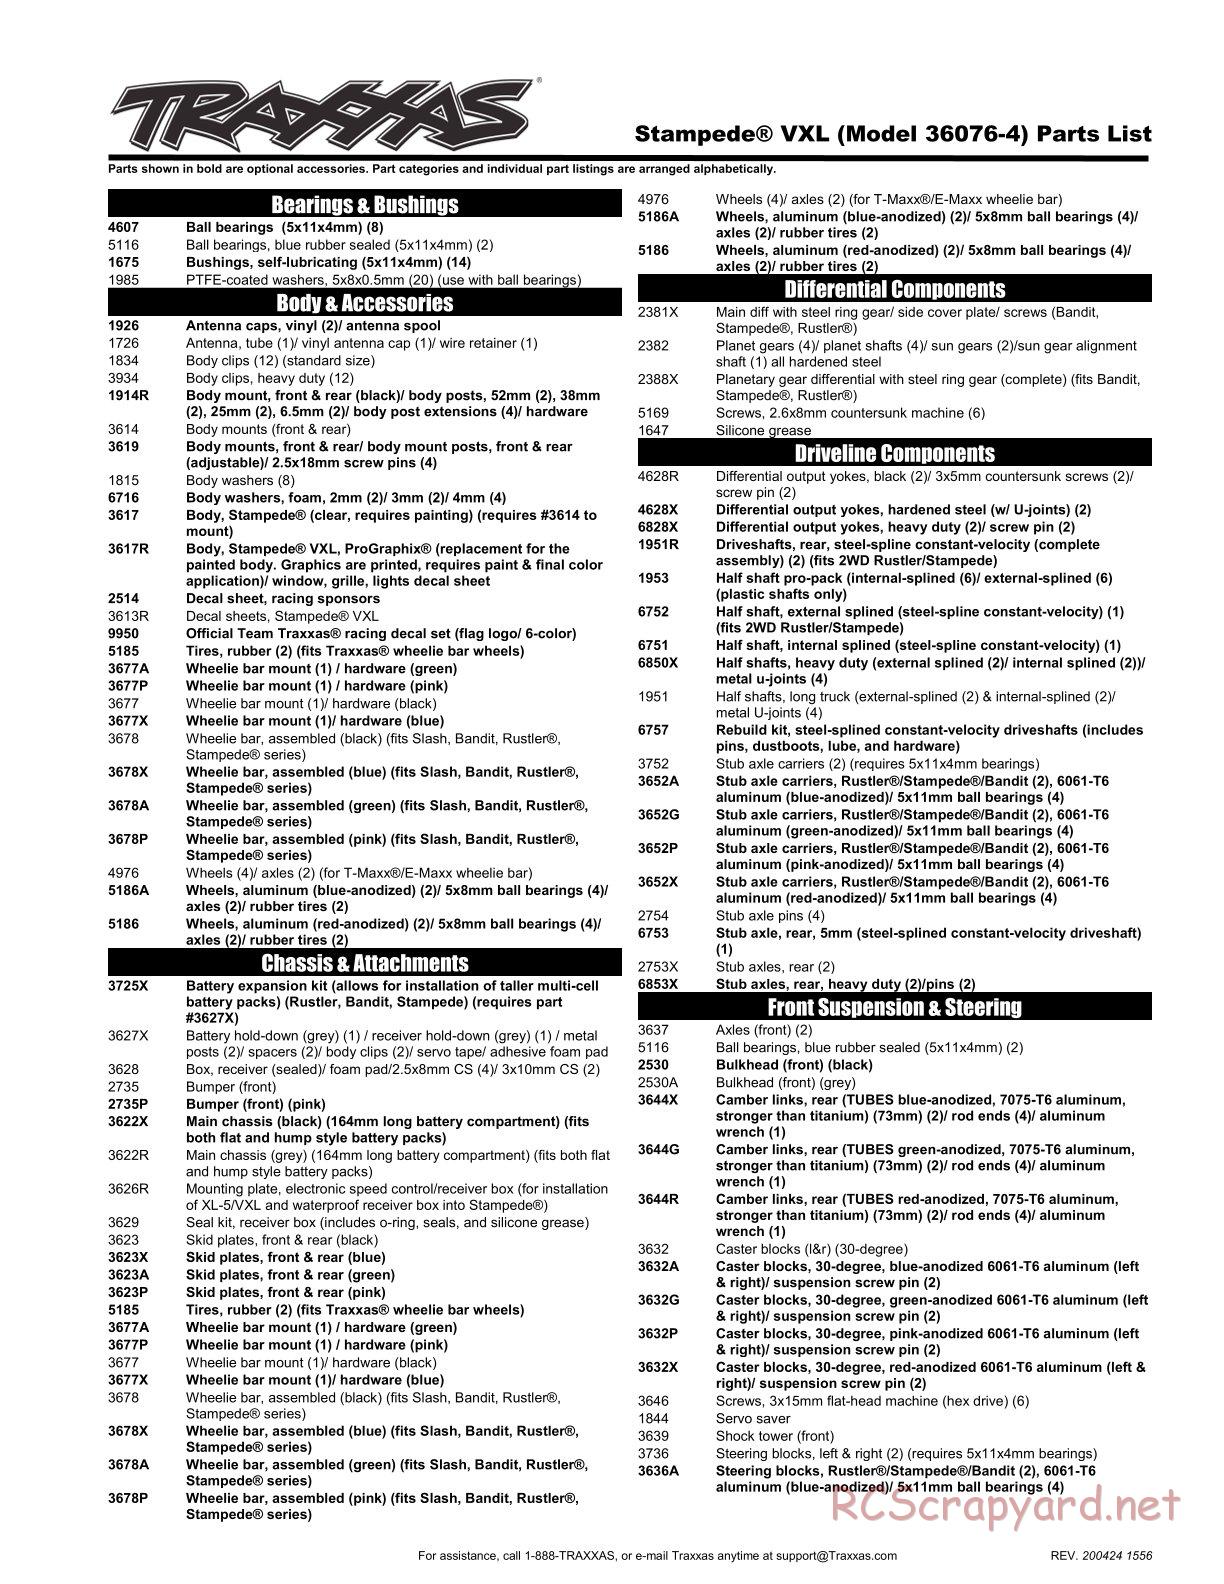 Traxxas - Stampede VXL TSM Rock n' Roll (2017) - Parts List - Page 1